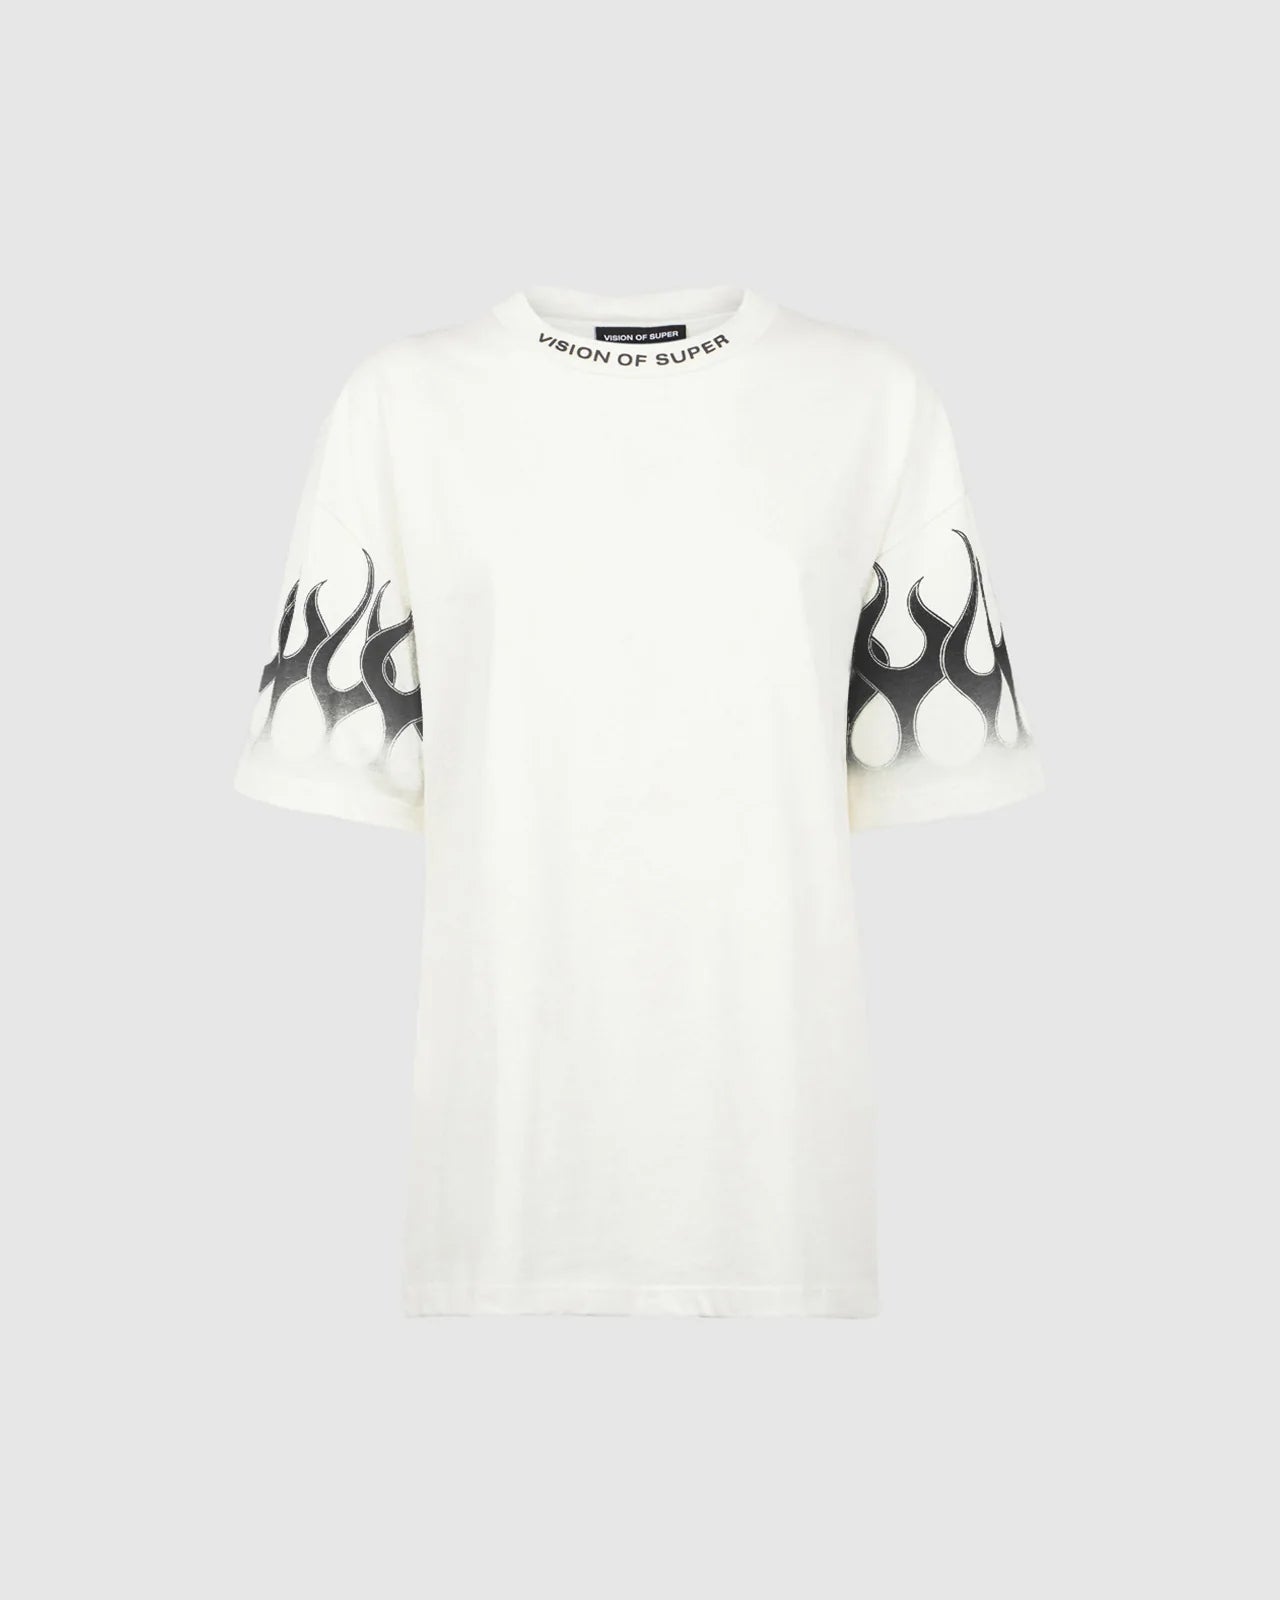 Vision Of Super T-Shirt bianca con fiamme nere